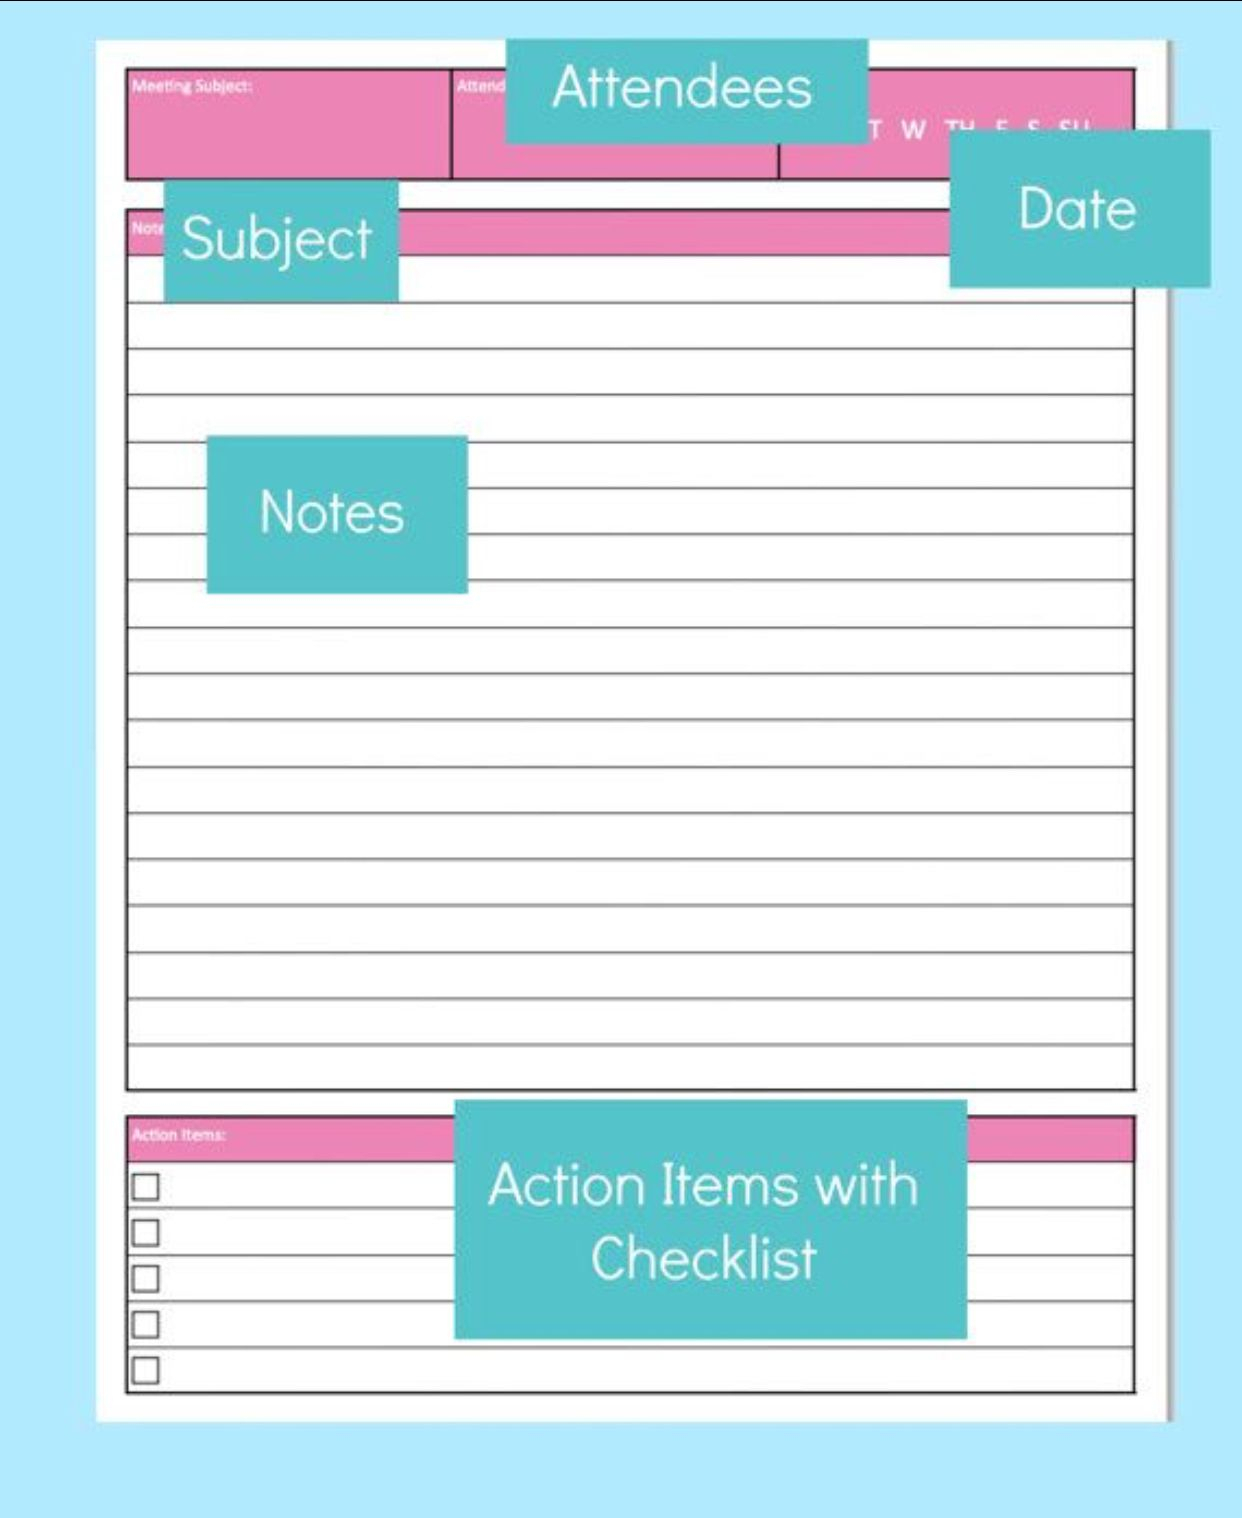 Note Taking Templates For Meetings I Would - Rocketbook Regarding Meeting Notes Template With Action Items